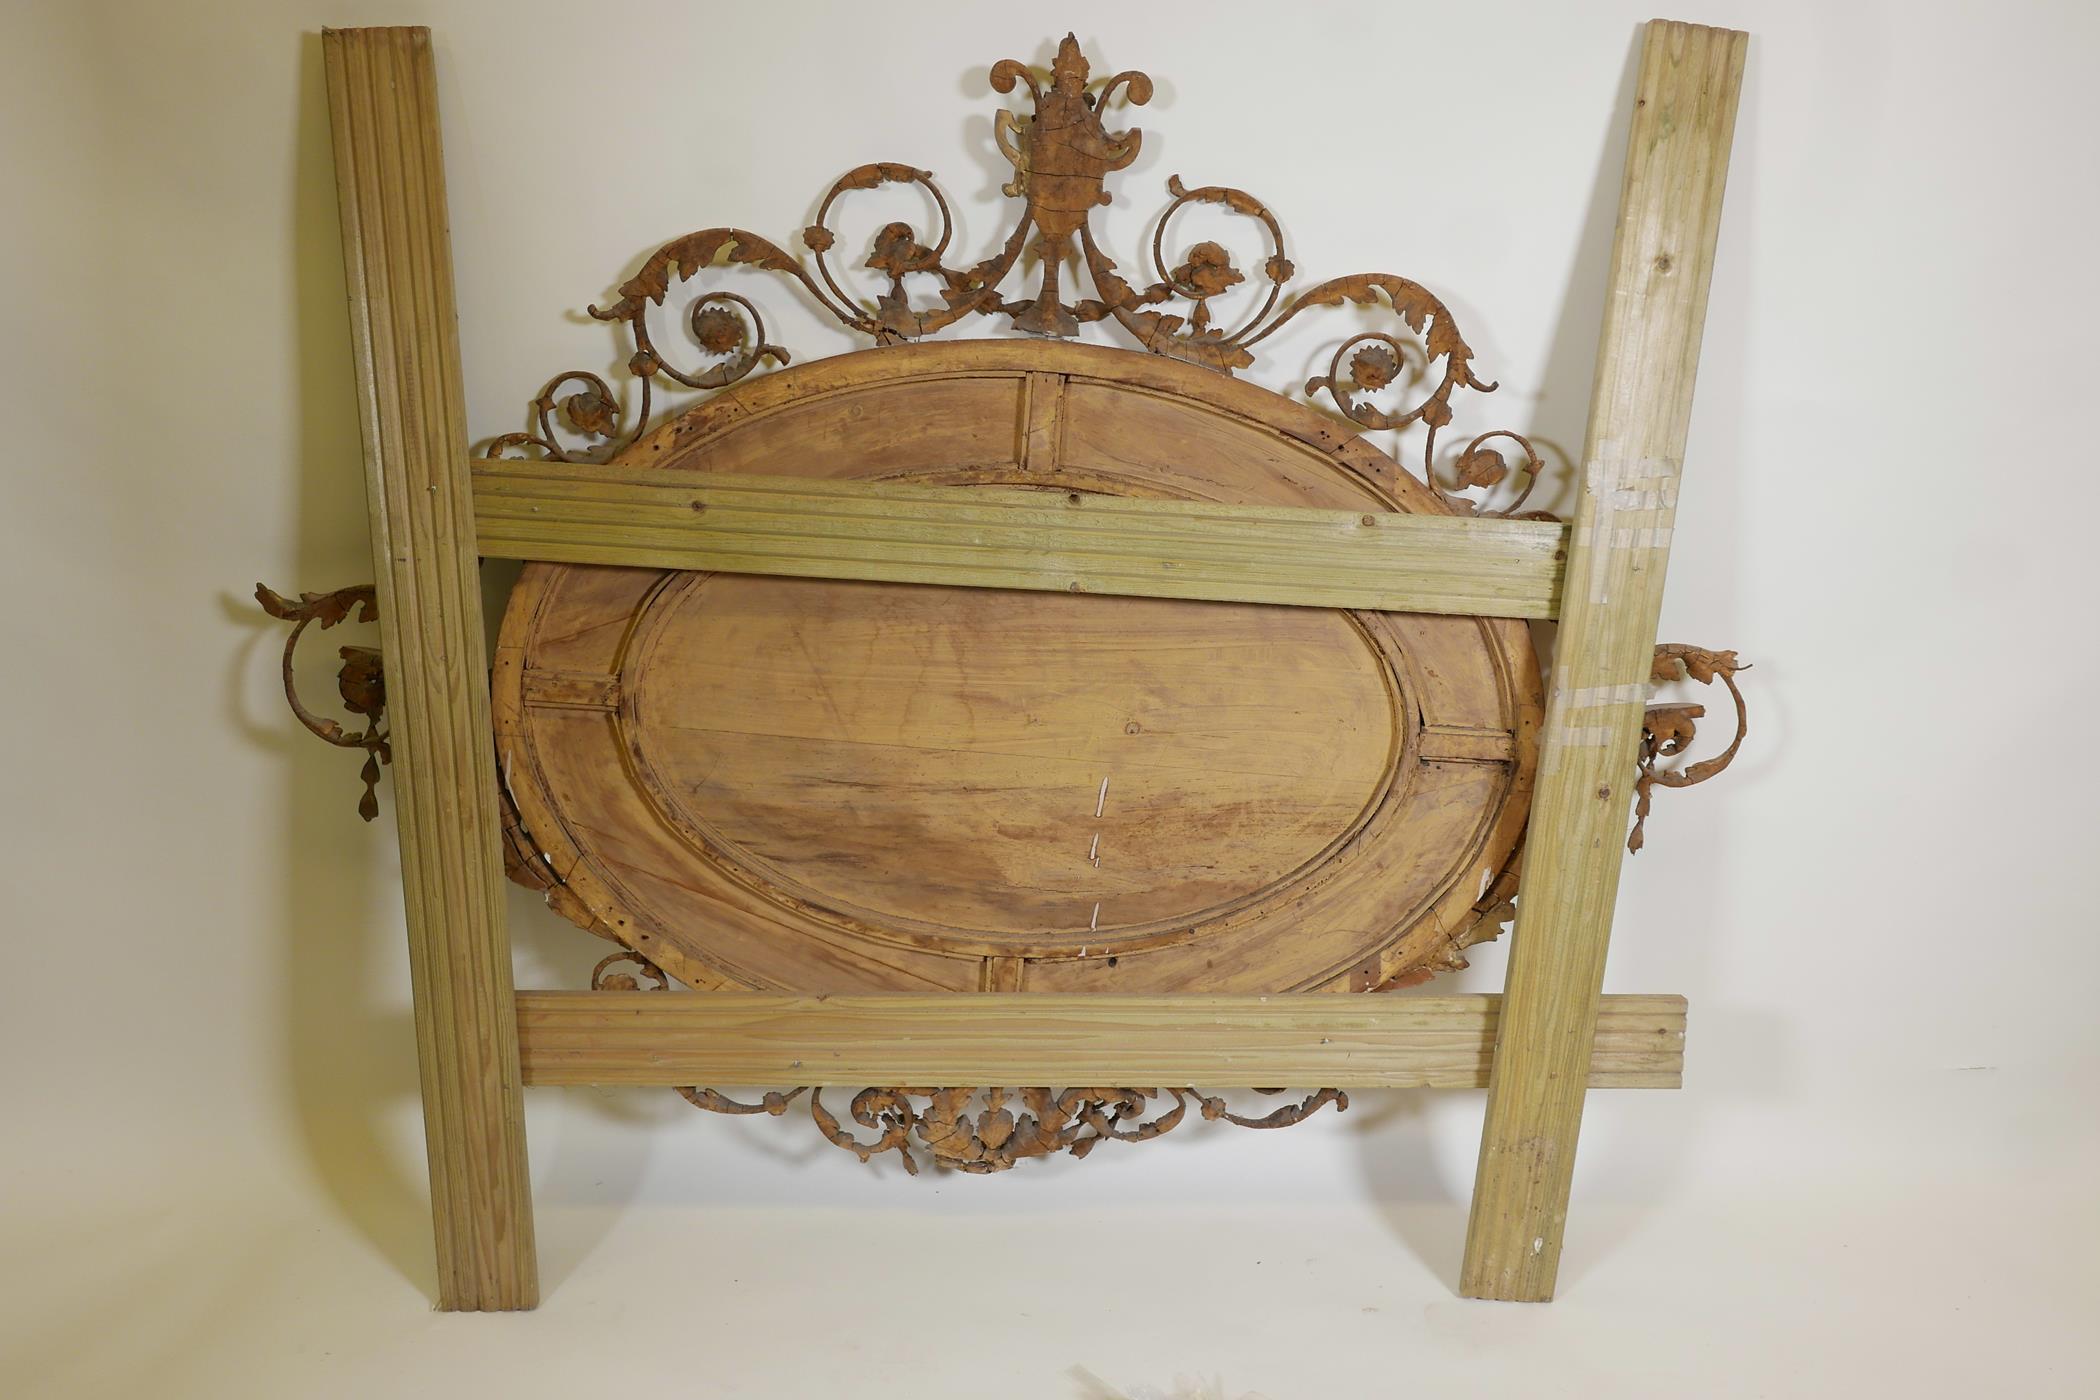 A C19th Adam style giltwood and composition sectional hall mirror, A/F, 60" x 46" - Image 7 of 7